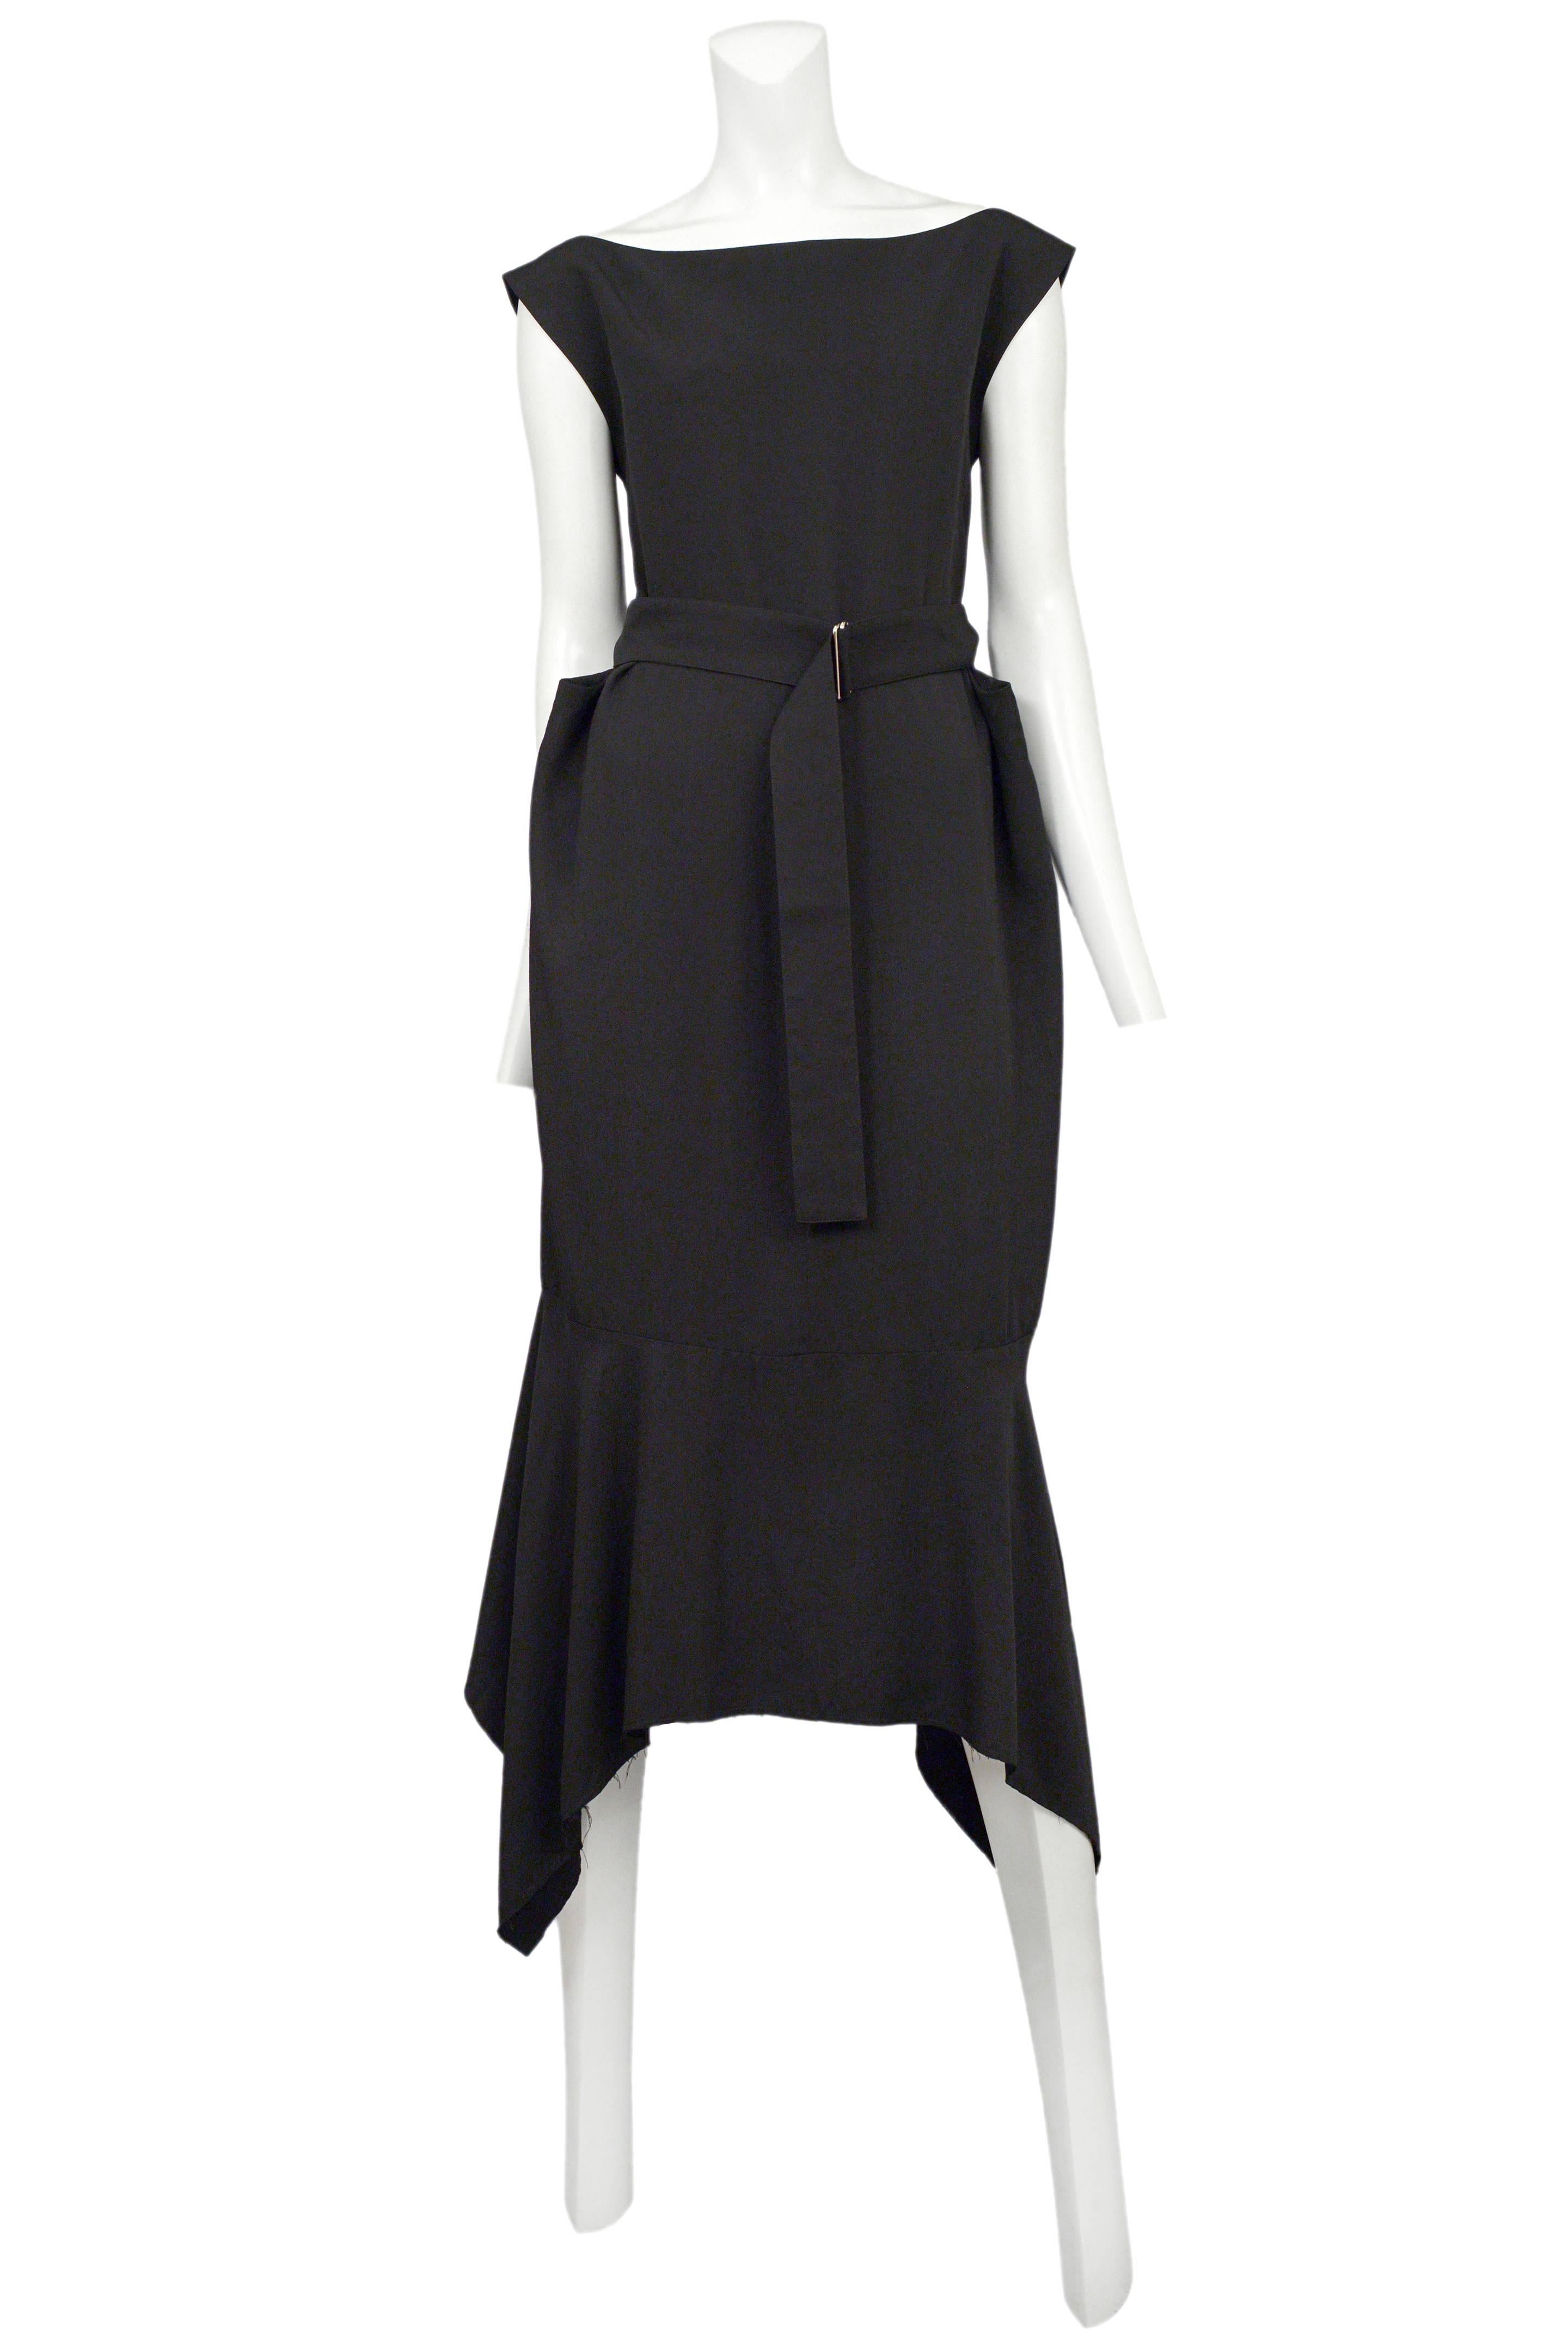 Vintage Yohji Yamamoto black below the knee dress featuring cap sleeves, a curved hem, a built in waist belt and an open back.
Please inquire for additional images.